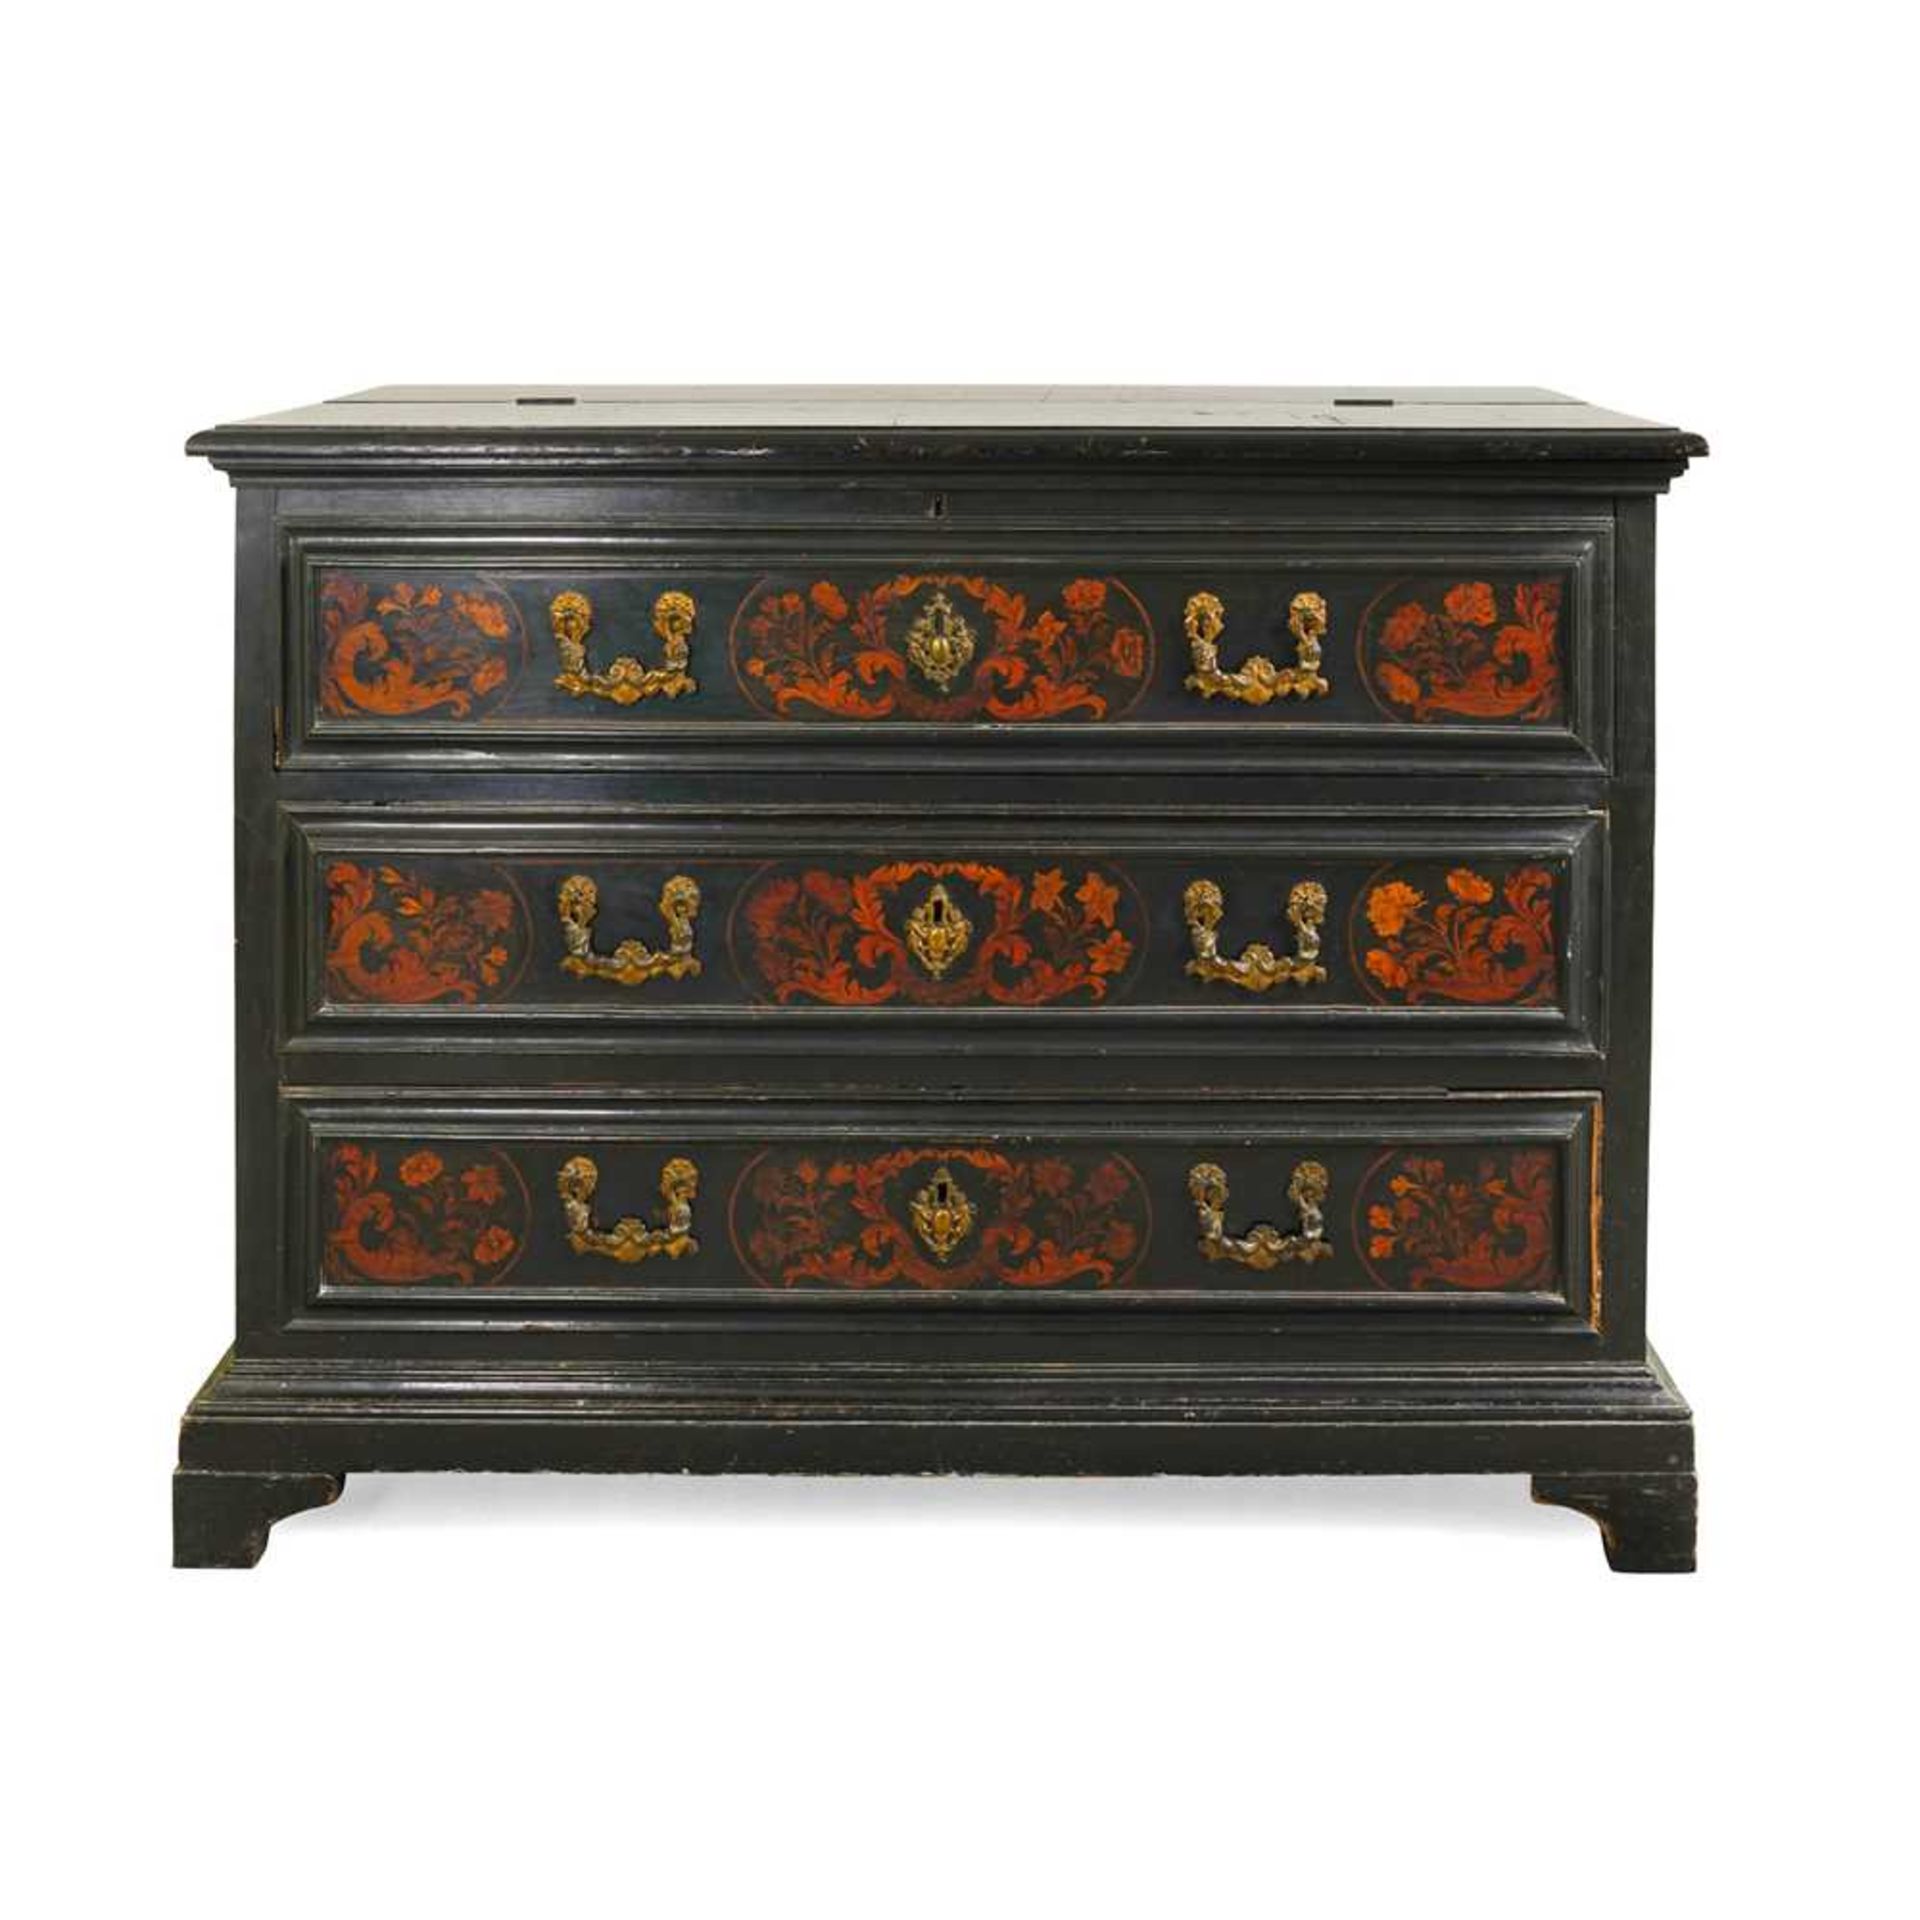 A FLEMISH EBONISED AND MARQUETRY SECRETAIRE CHEST 18TH CENTURY